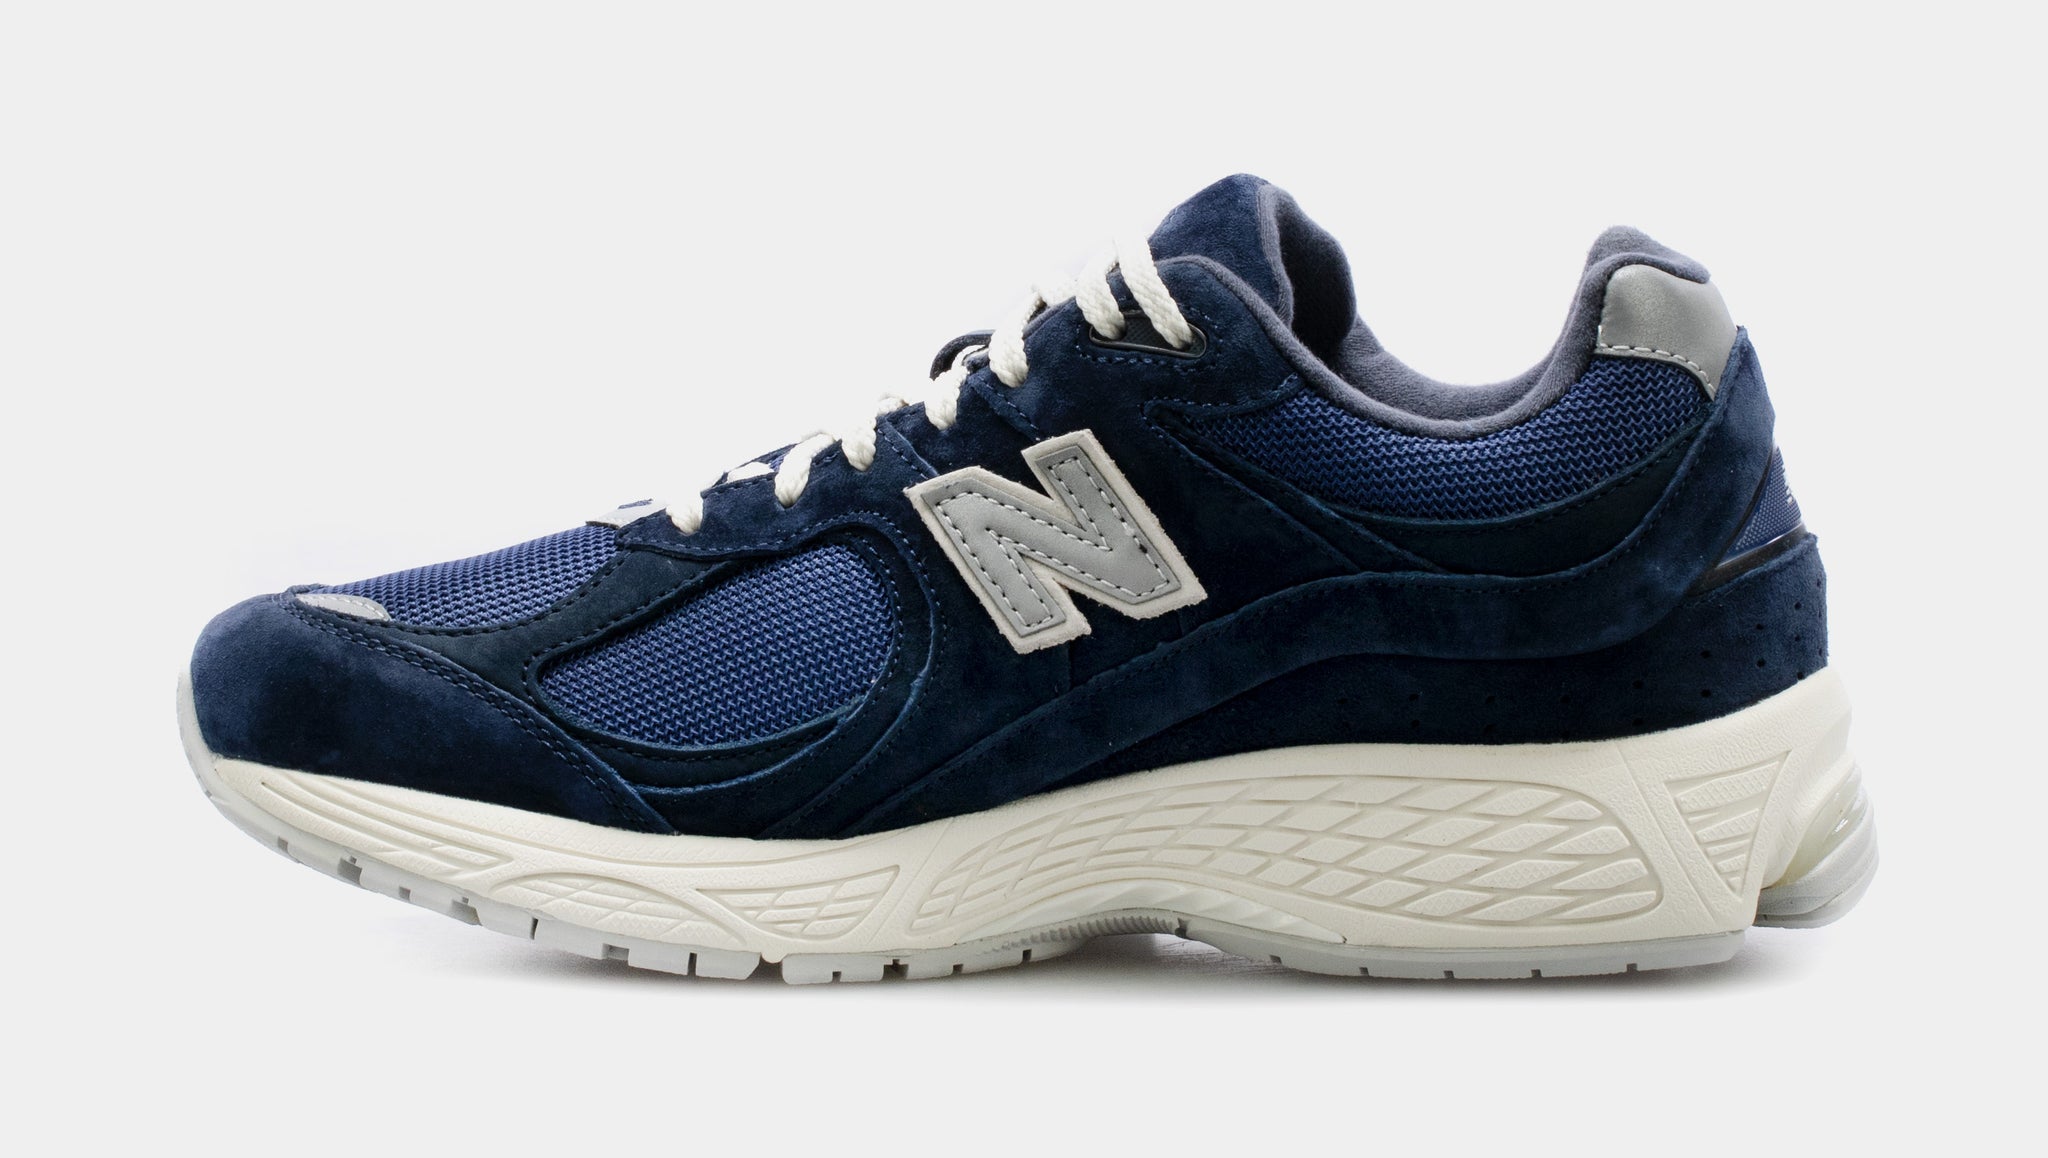 New Balance St. Louis wants your feet to be in good shoes